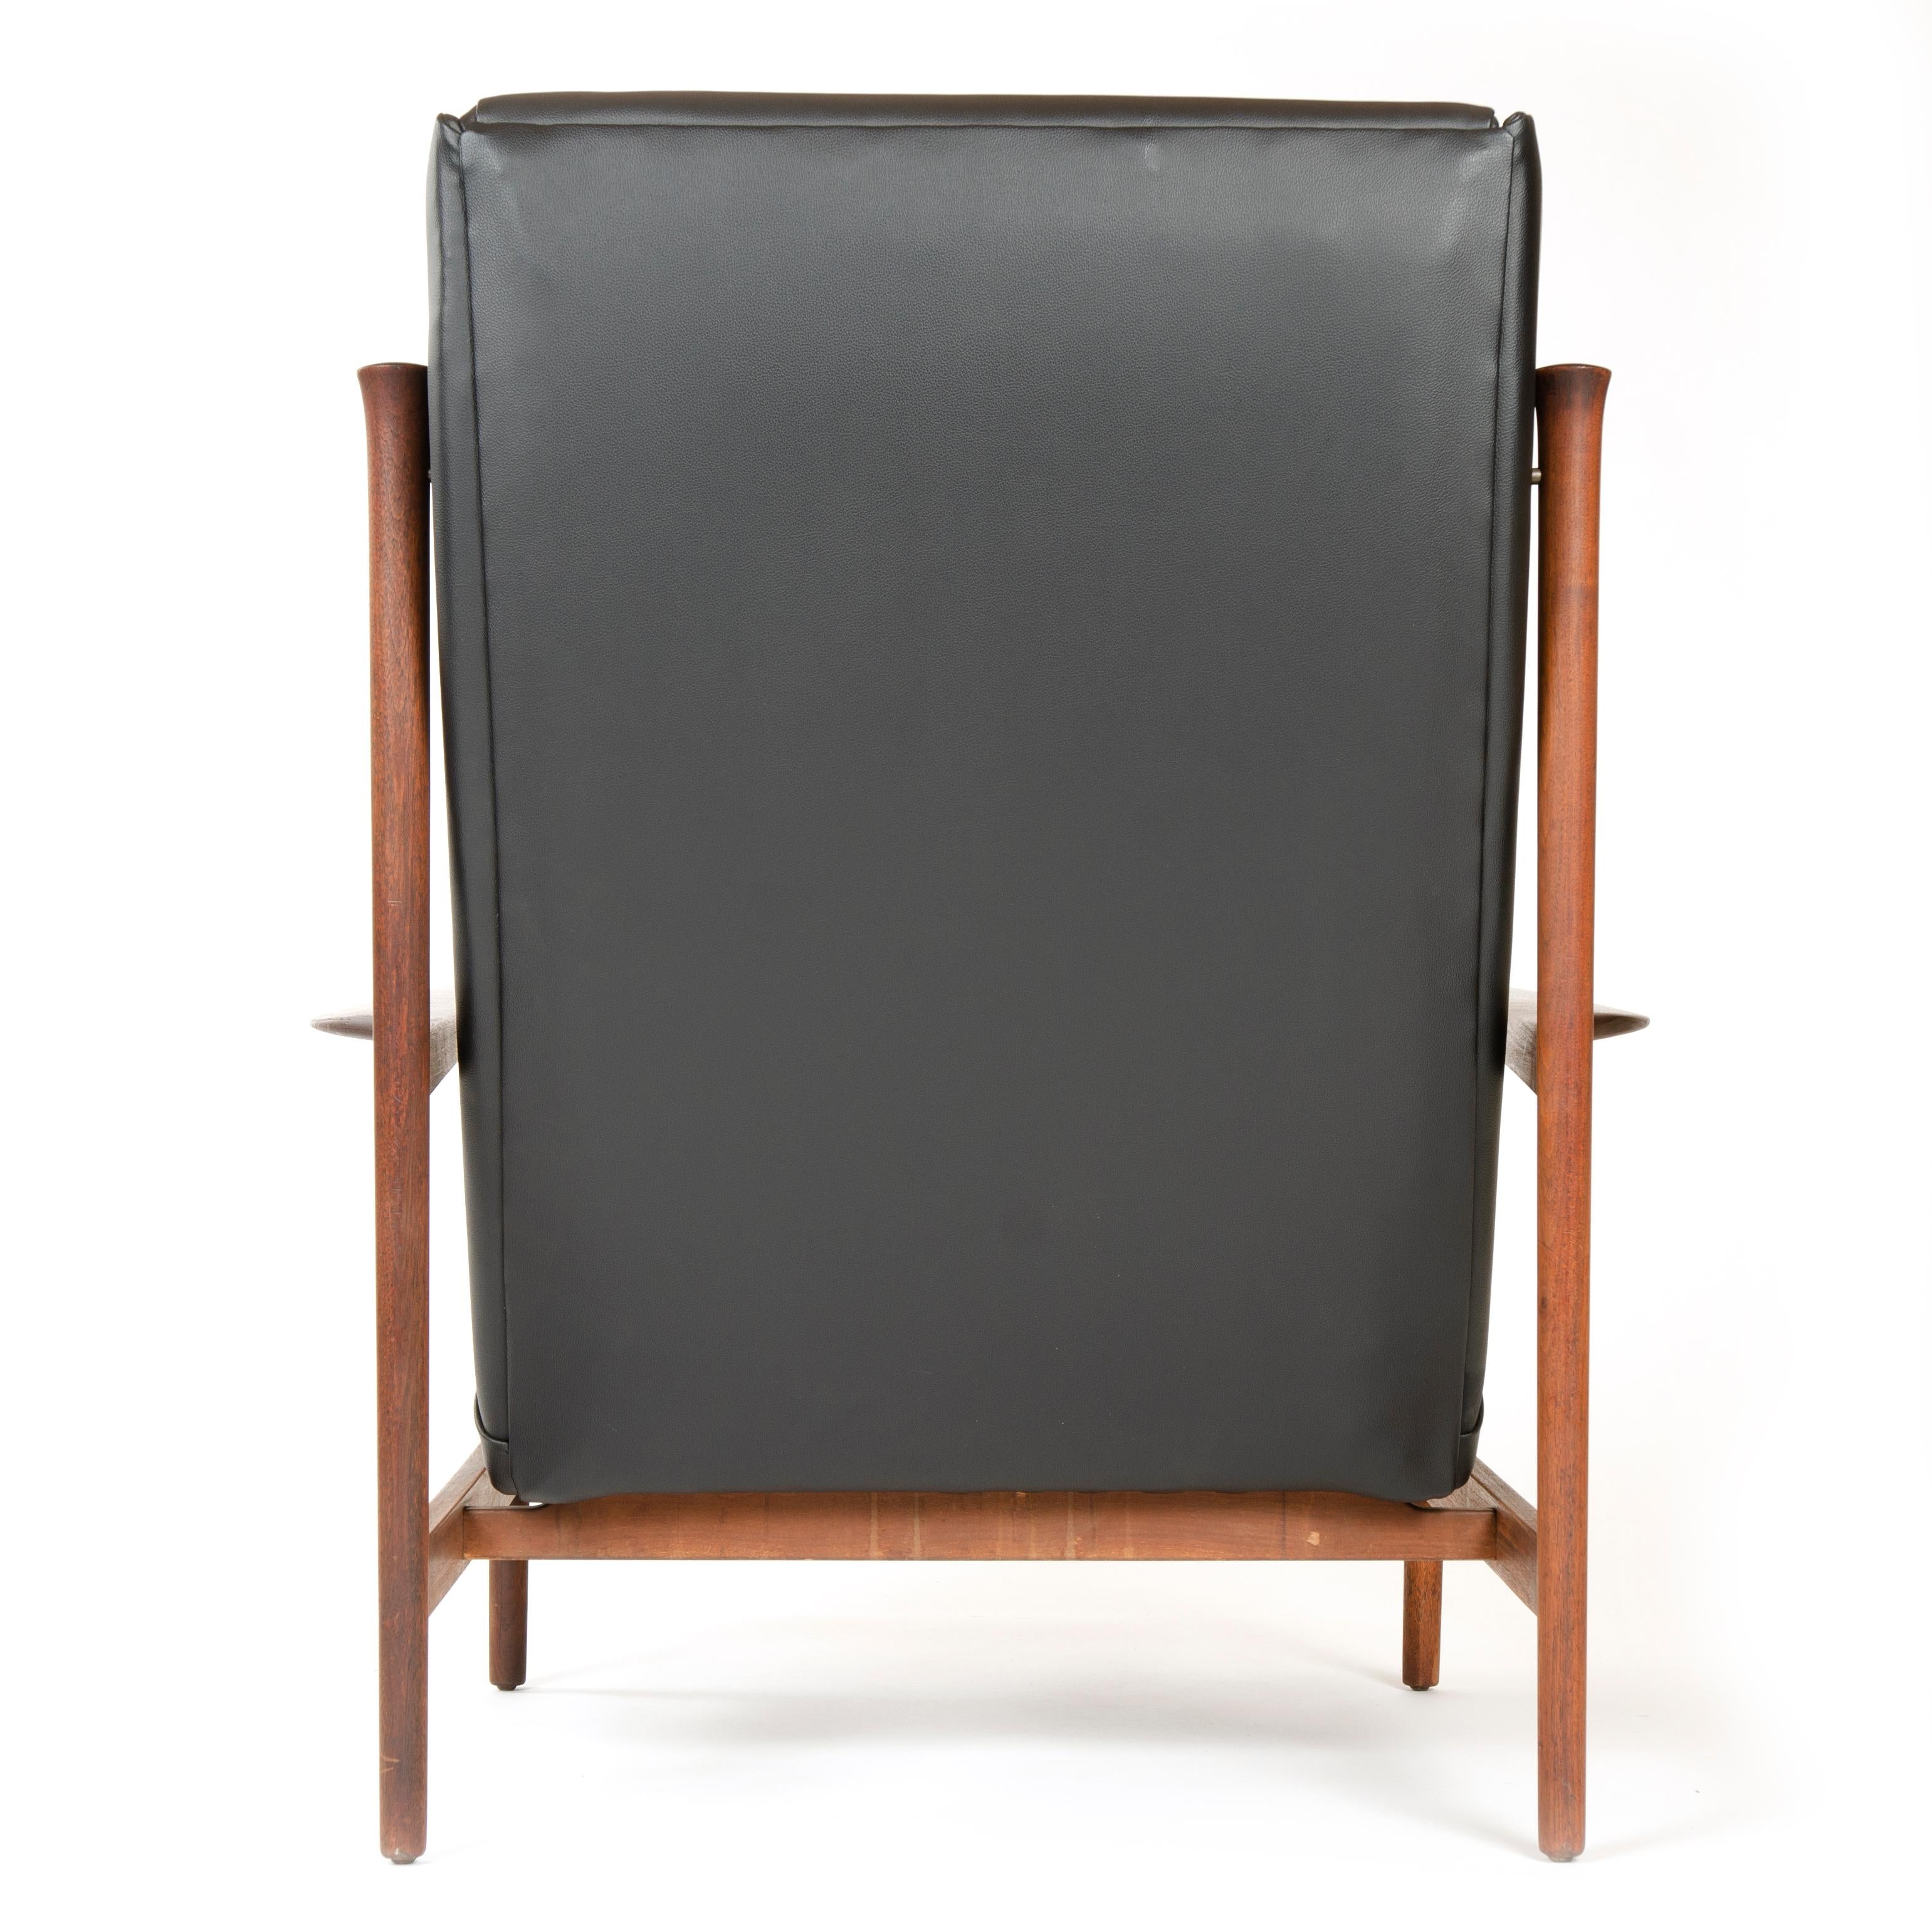 1950s Danish Black Leather Lounge Chair by Ib Kofod Larsen In Good Condition For Sale In Sagaponack, NY